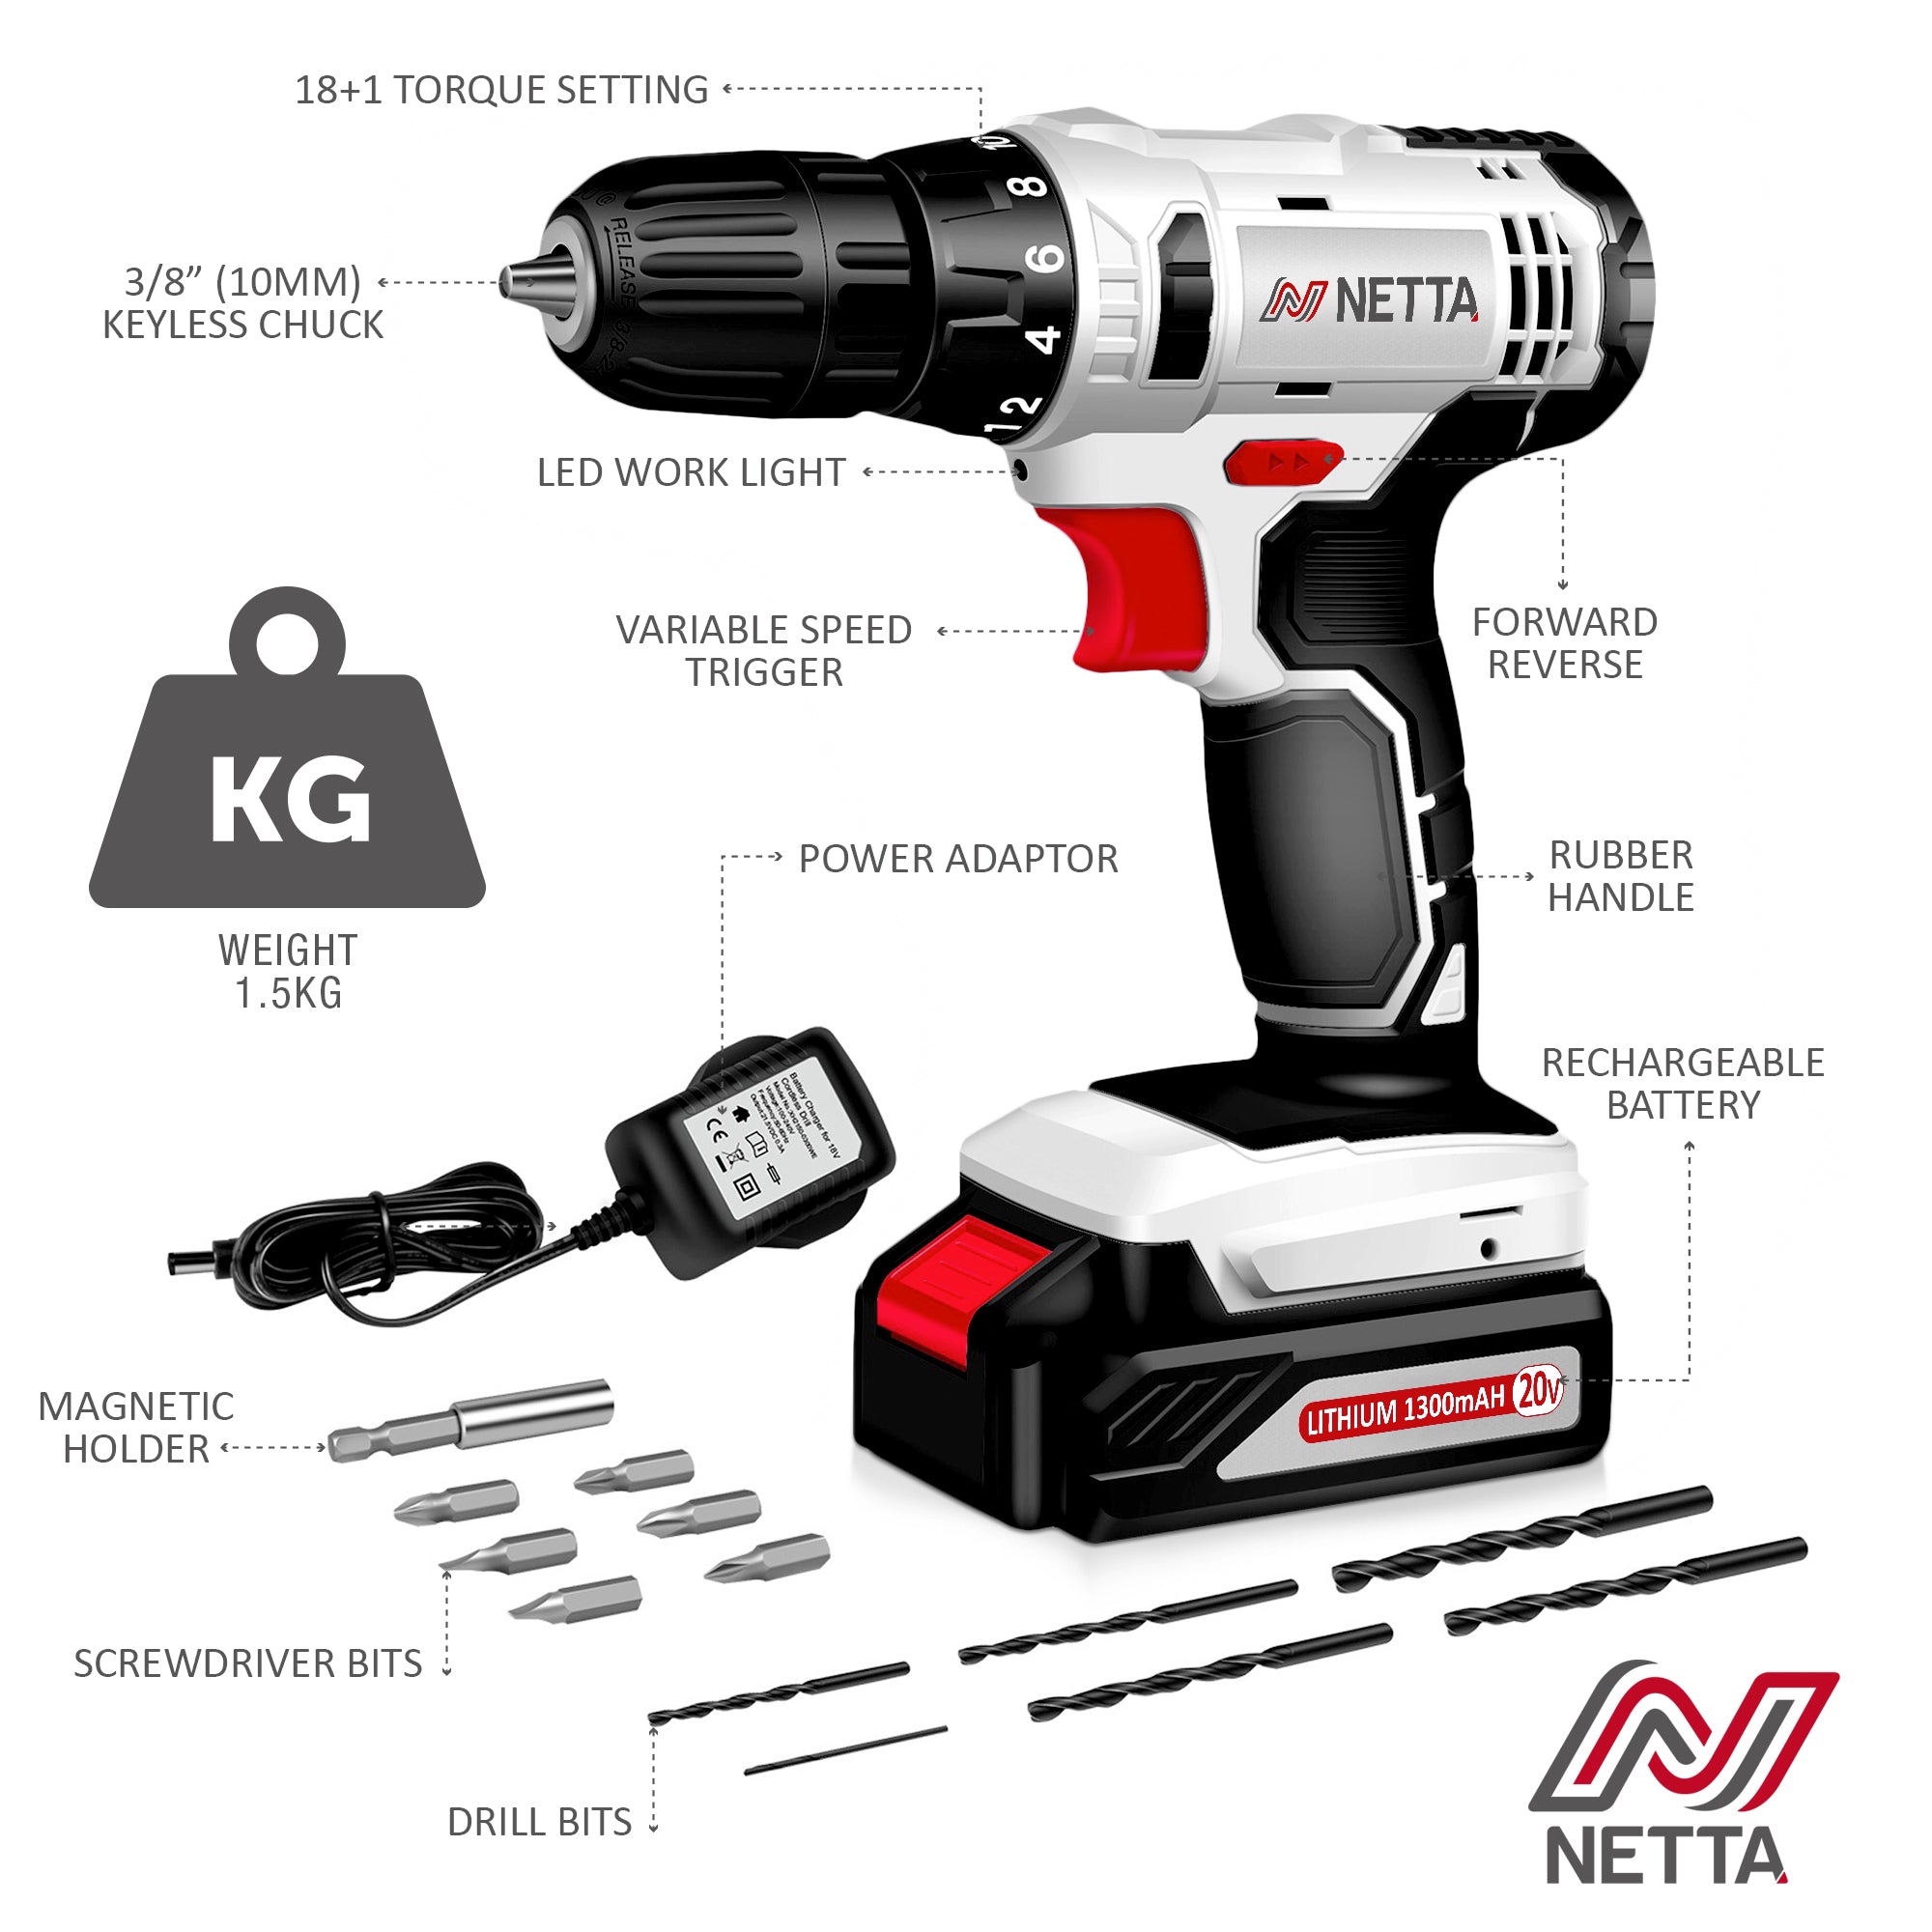 NETTA 20V Cordless Drill with 13pc Accessory and LED Work Light